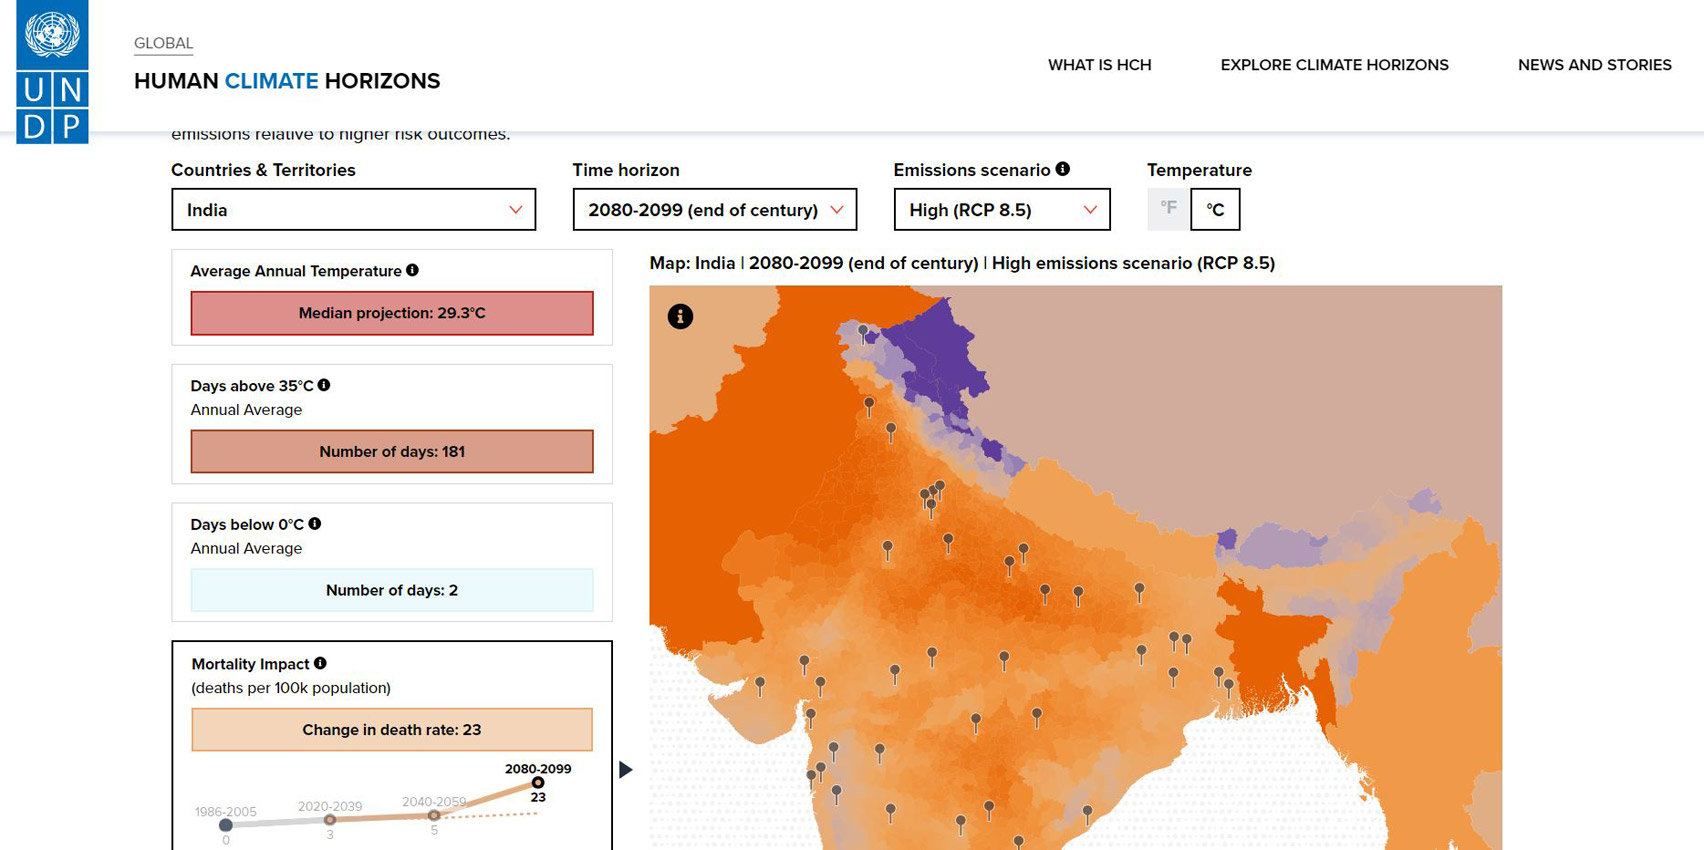 India on Human Climate Horizons map